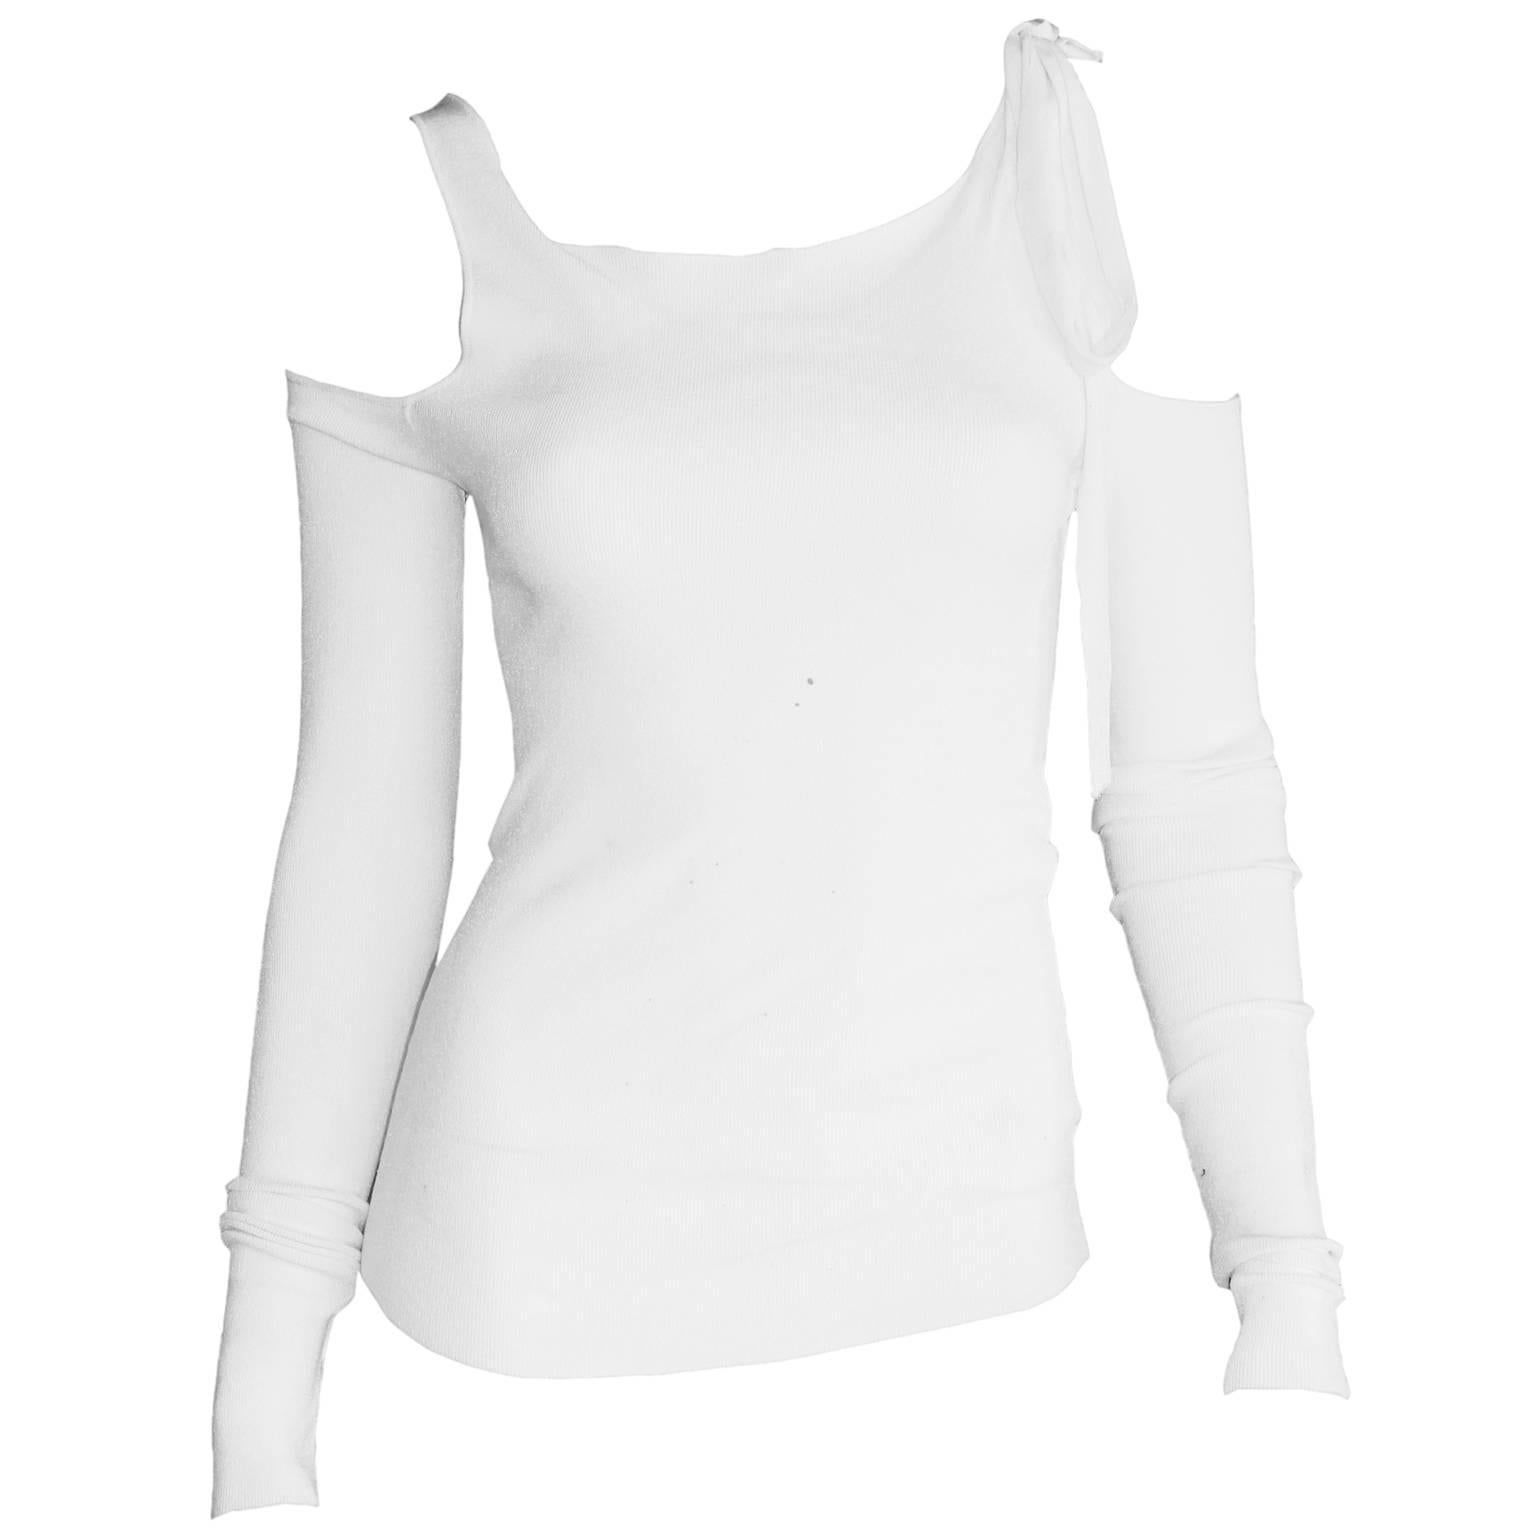 The Most Gorgeous Tom Ford For Gucci FW 2003 White Cold-Shoulder Sweater! L For Sale